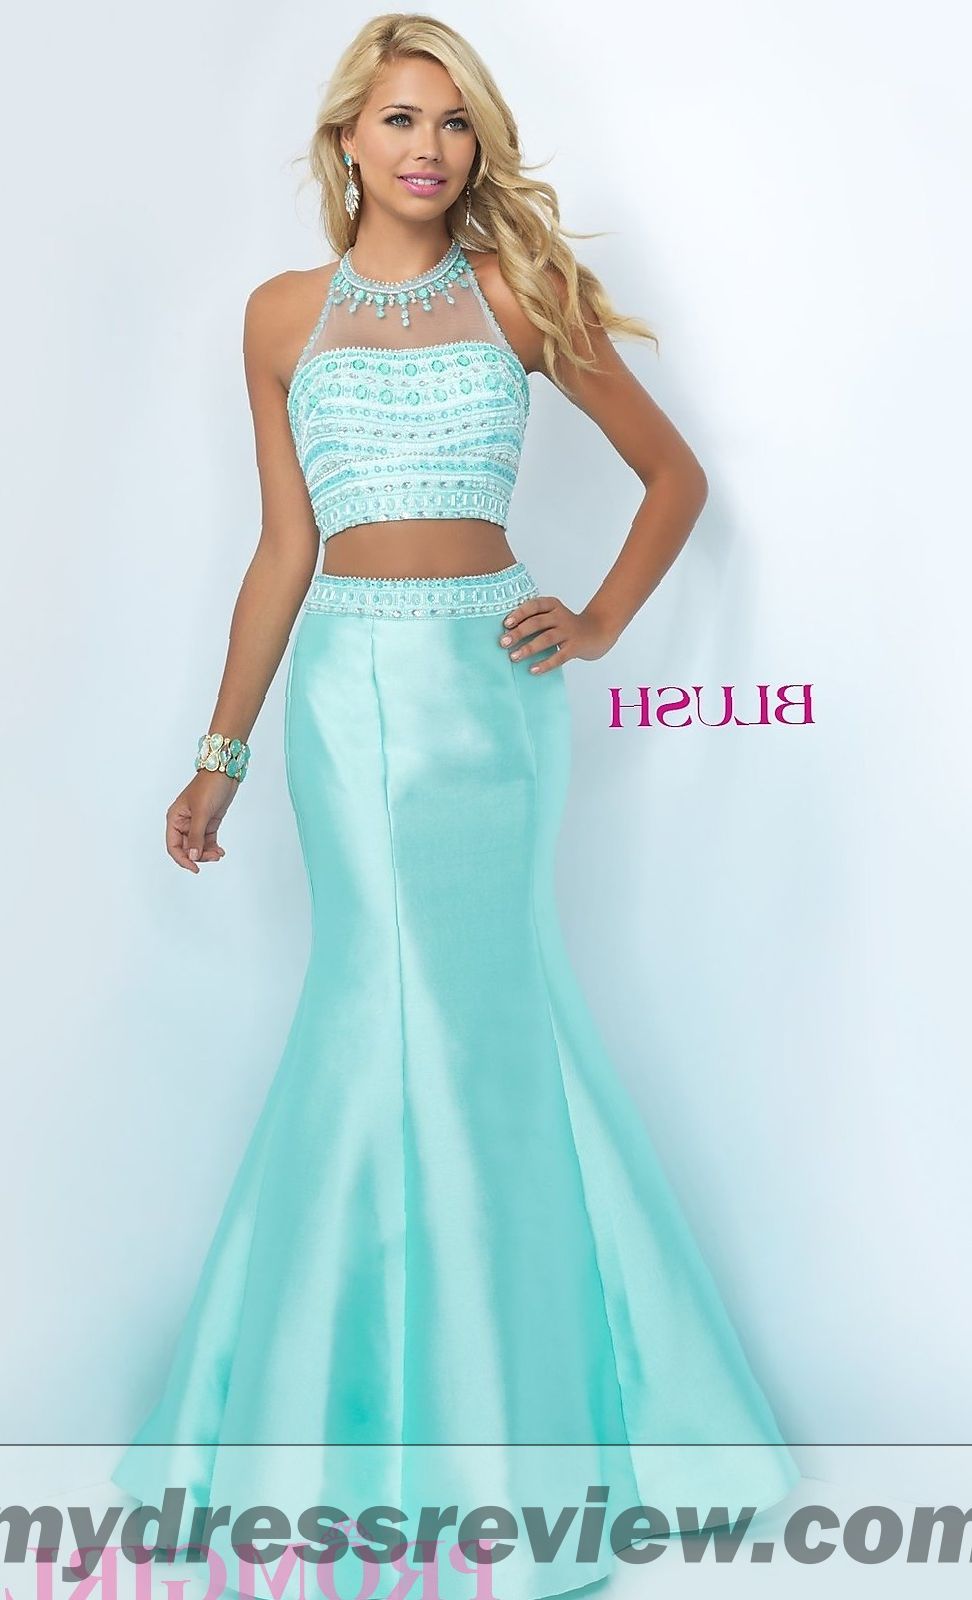 Blush 2 Piece Prom Dress - Things To Know Before Choosing